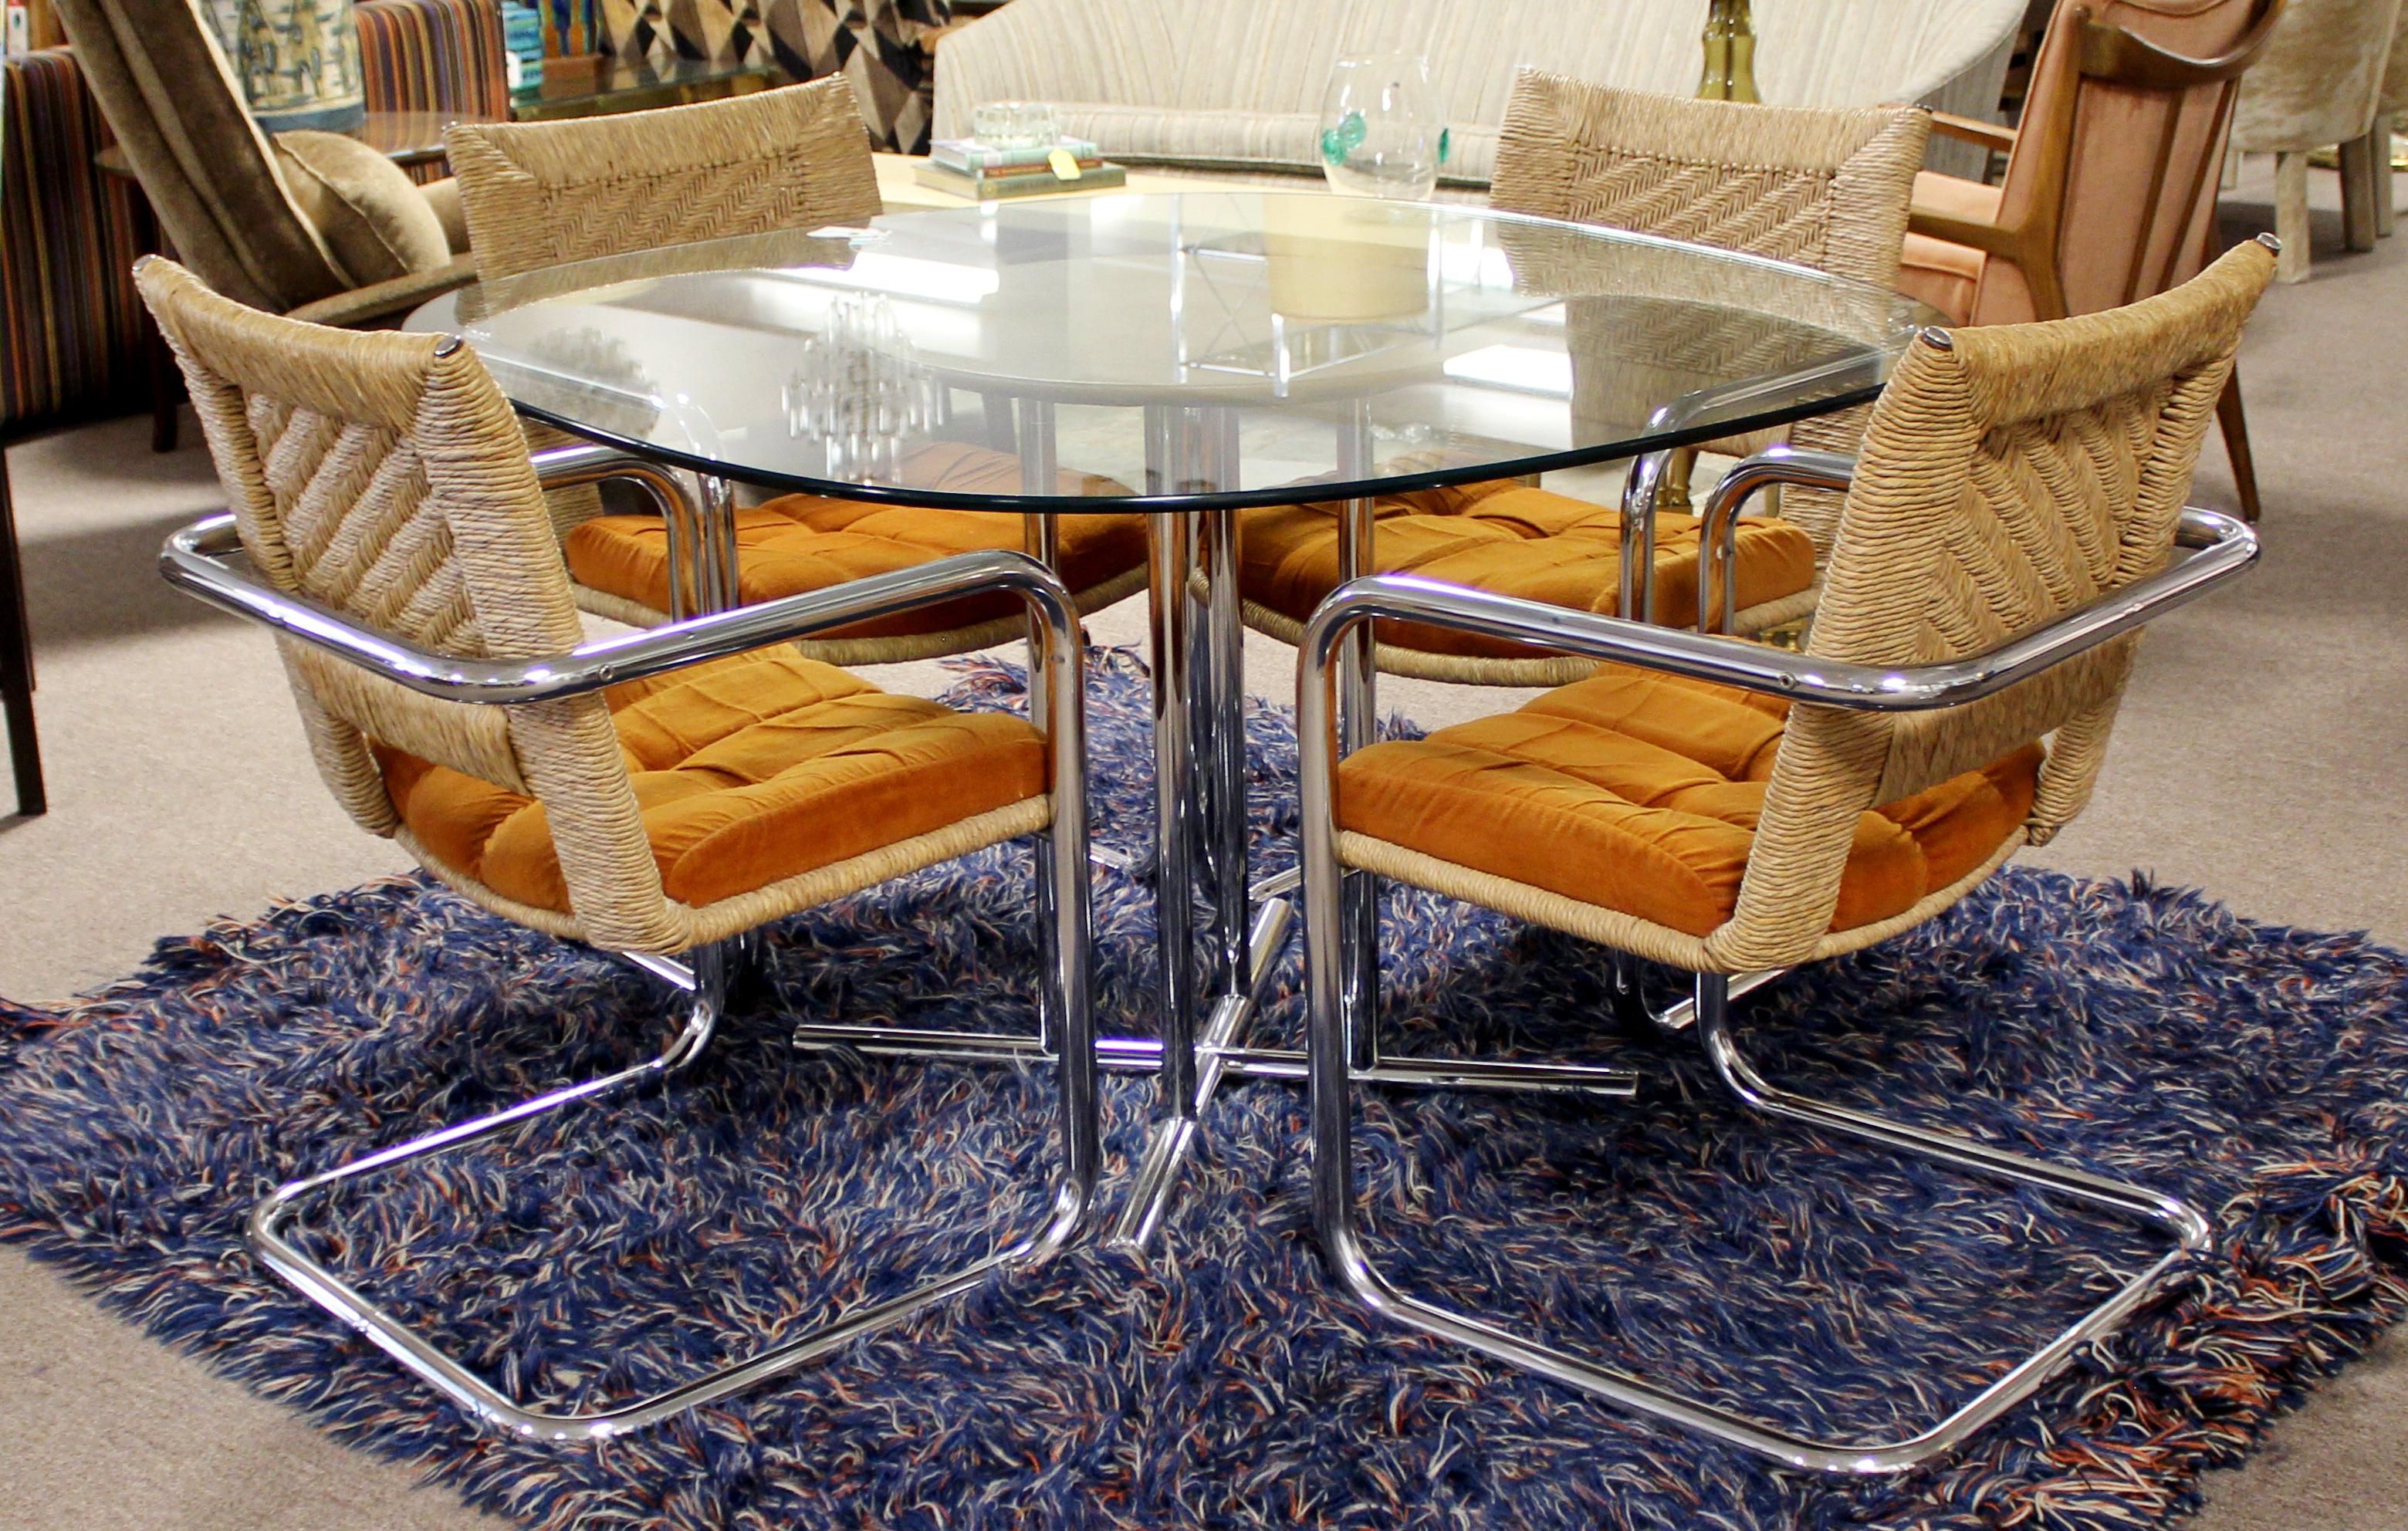 For your consideration is a timeless dining or dinette set, including table and four armchairs, by Chromecraft, circa the 1970s. Table has a chrome base, with a beige leather insert and glass top. The four armchairs are cantilevered chrome, with